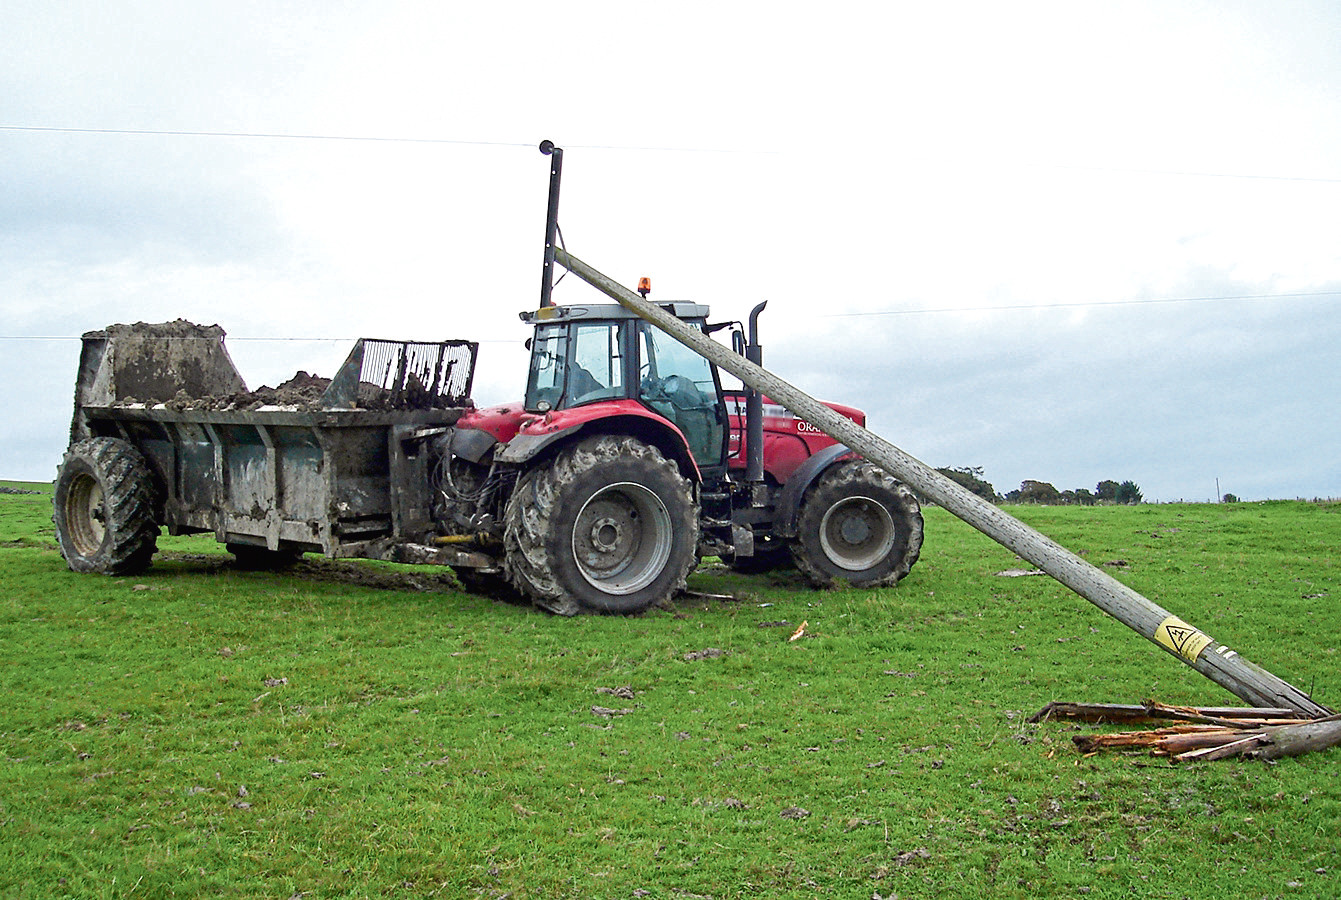 Farmers are asked to call 105 if their machinery comes into contact with an overhead powerline, like this tractor did.